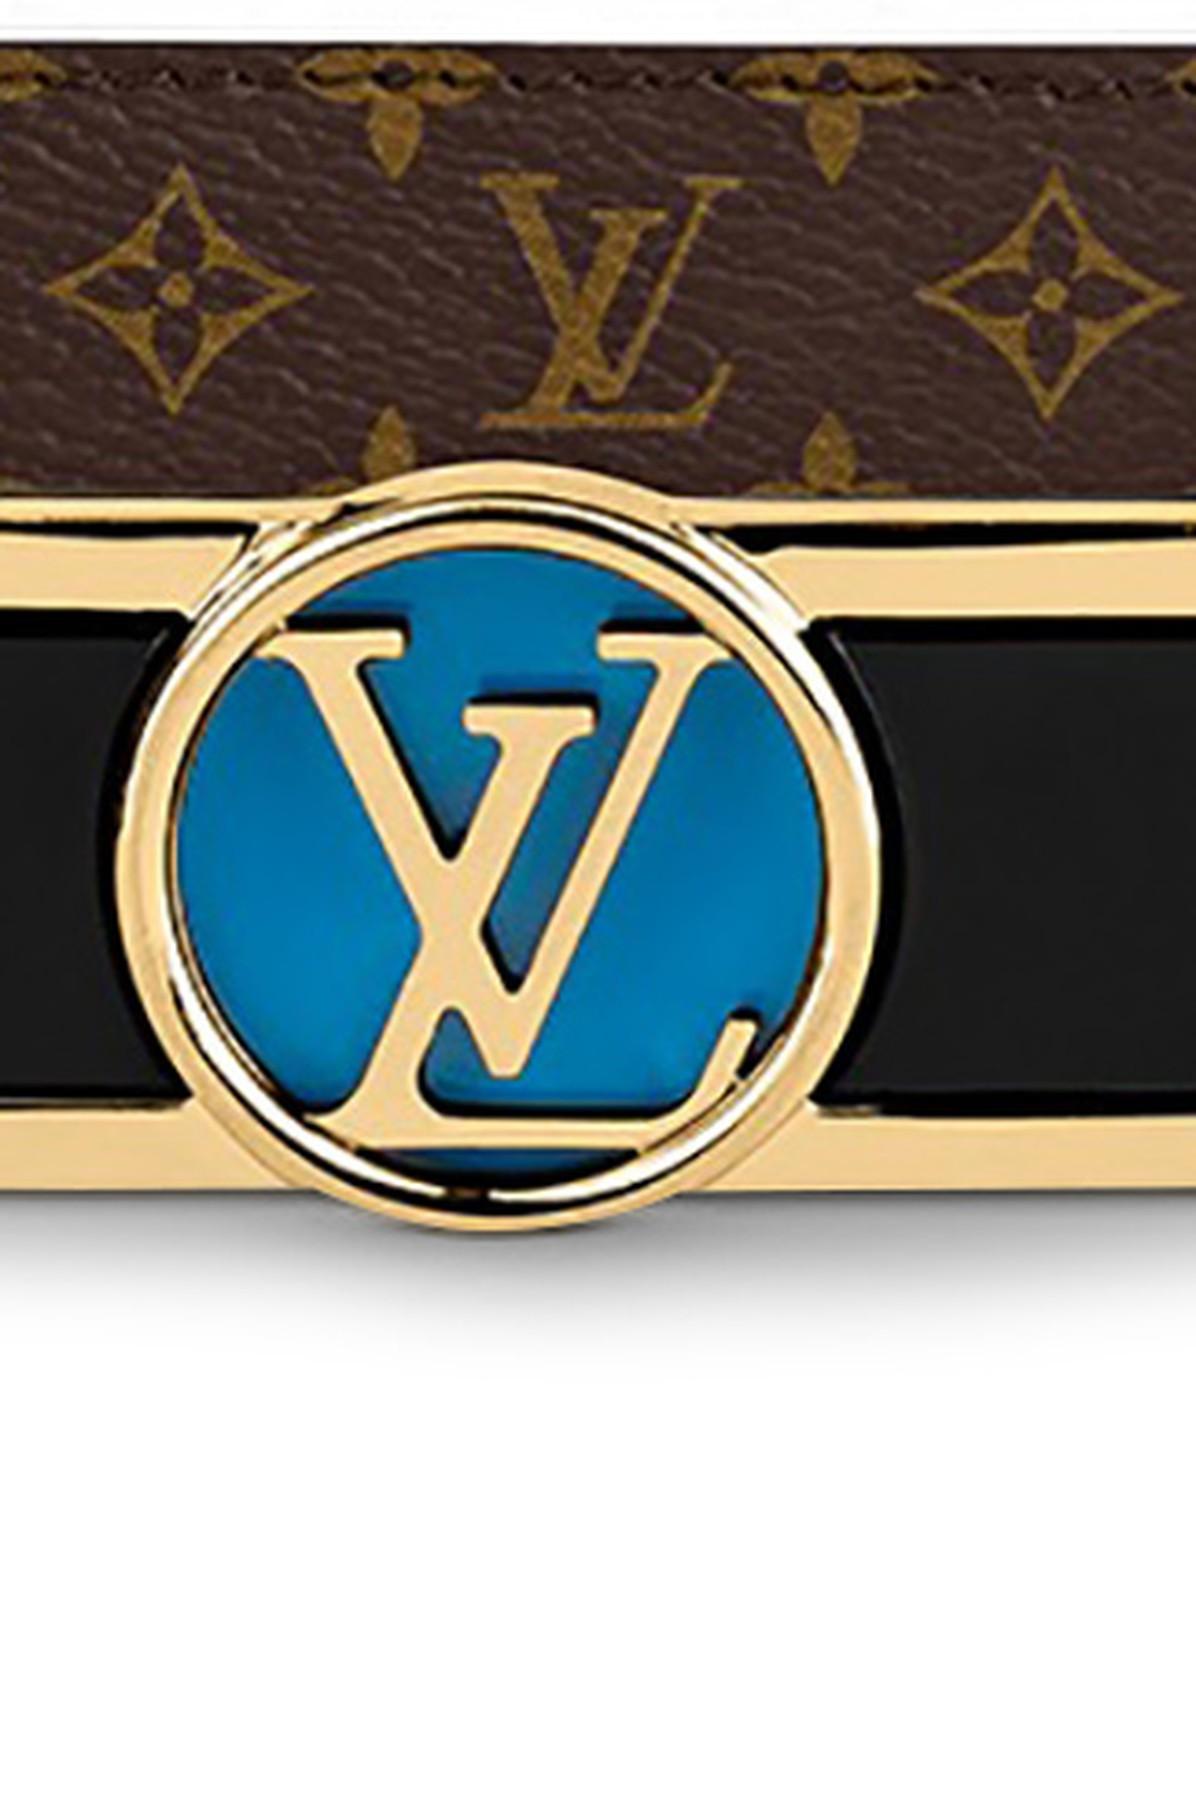 Louis Vuitton Dauphine Reversible Belt Monogram LV Pop 25MM Blue/Navy in  Calf Leather with SIlver-tone - US